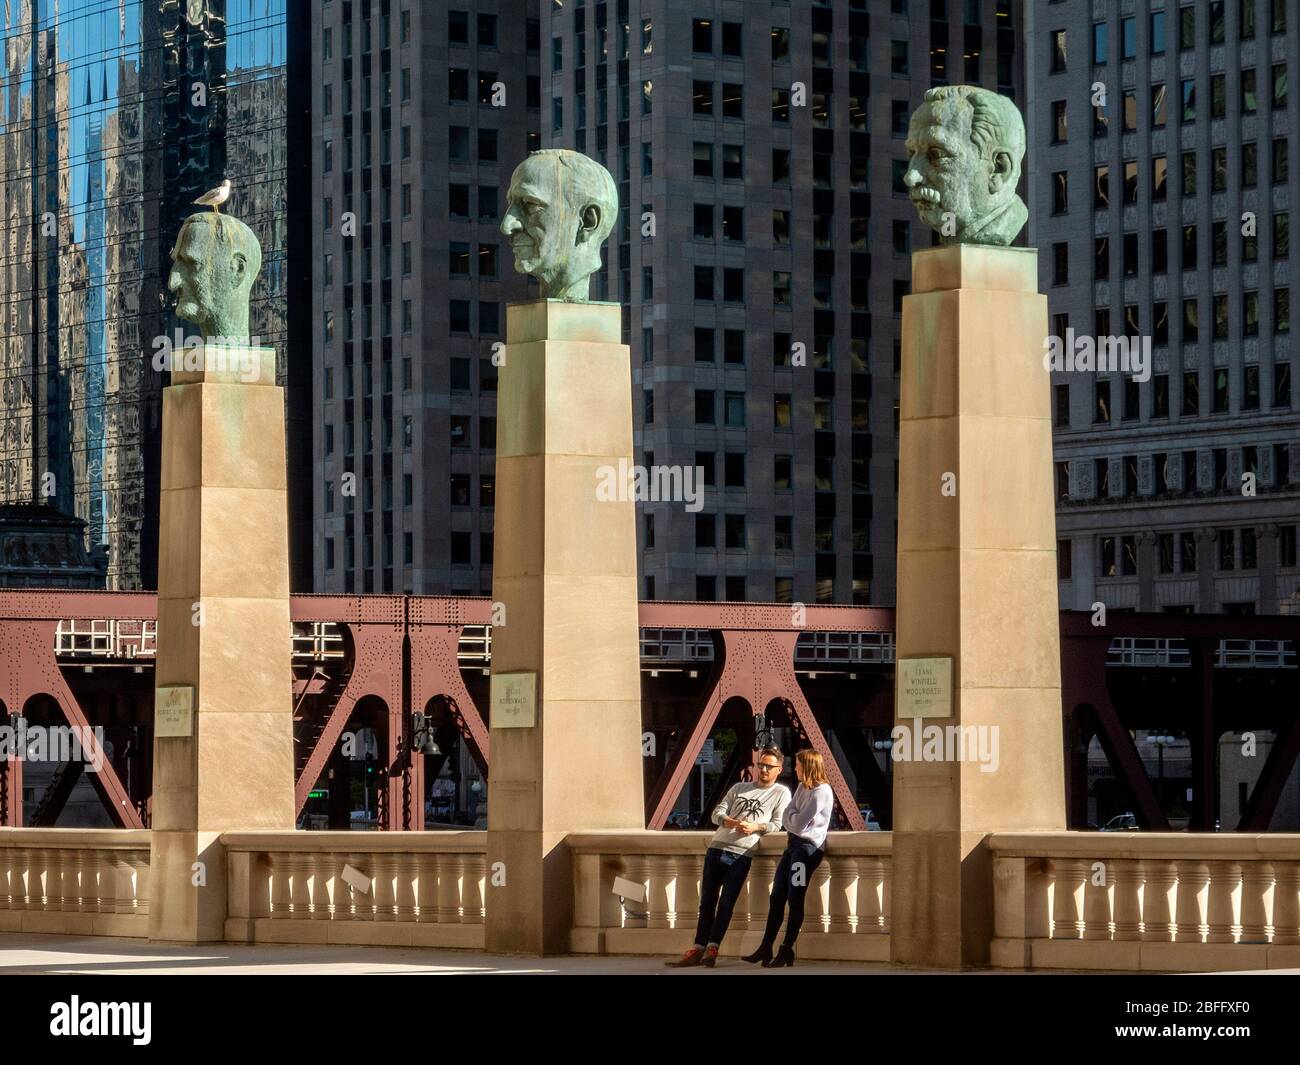 Portrait statues of famous businessmen Robert Wood, Julius Rosenwald and Frank Winfield Woolworth stand on columns before Chicago's Merchandise Mart on the Chicago River. Stock Photo